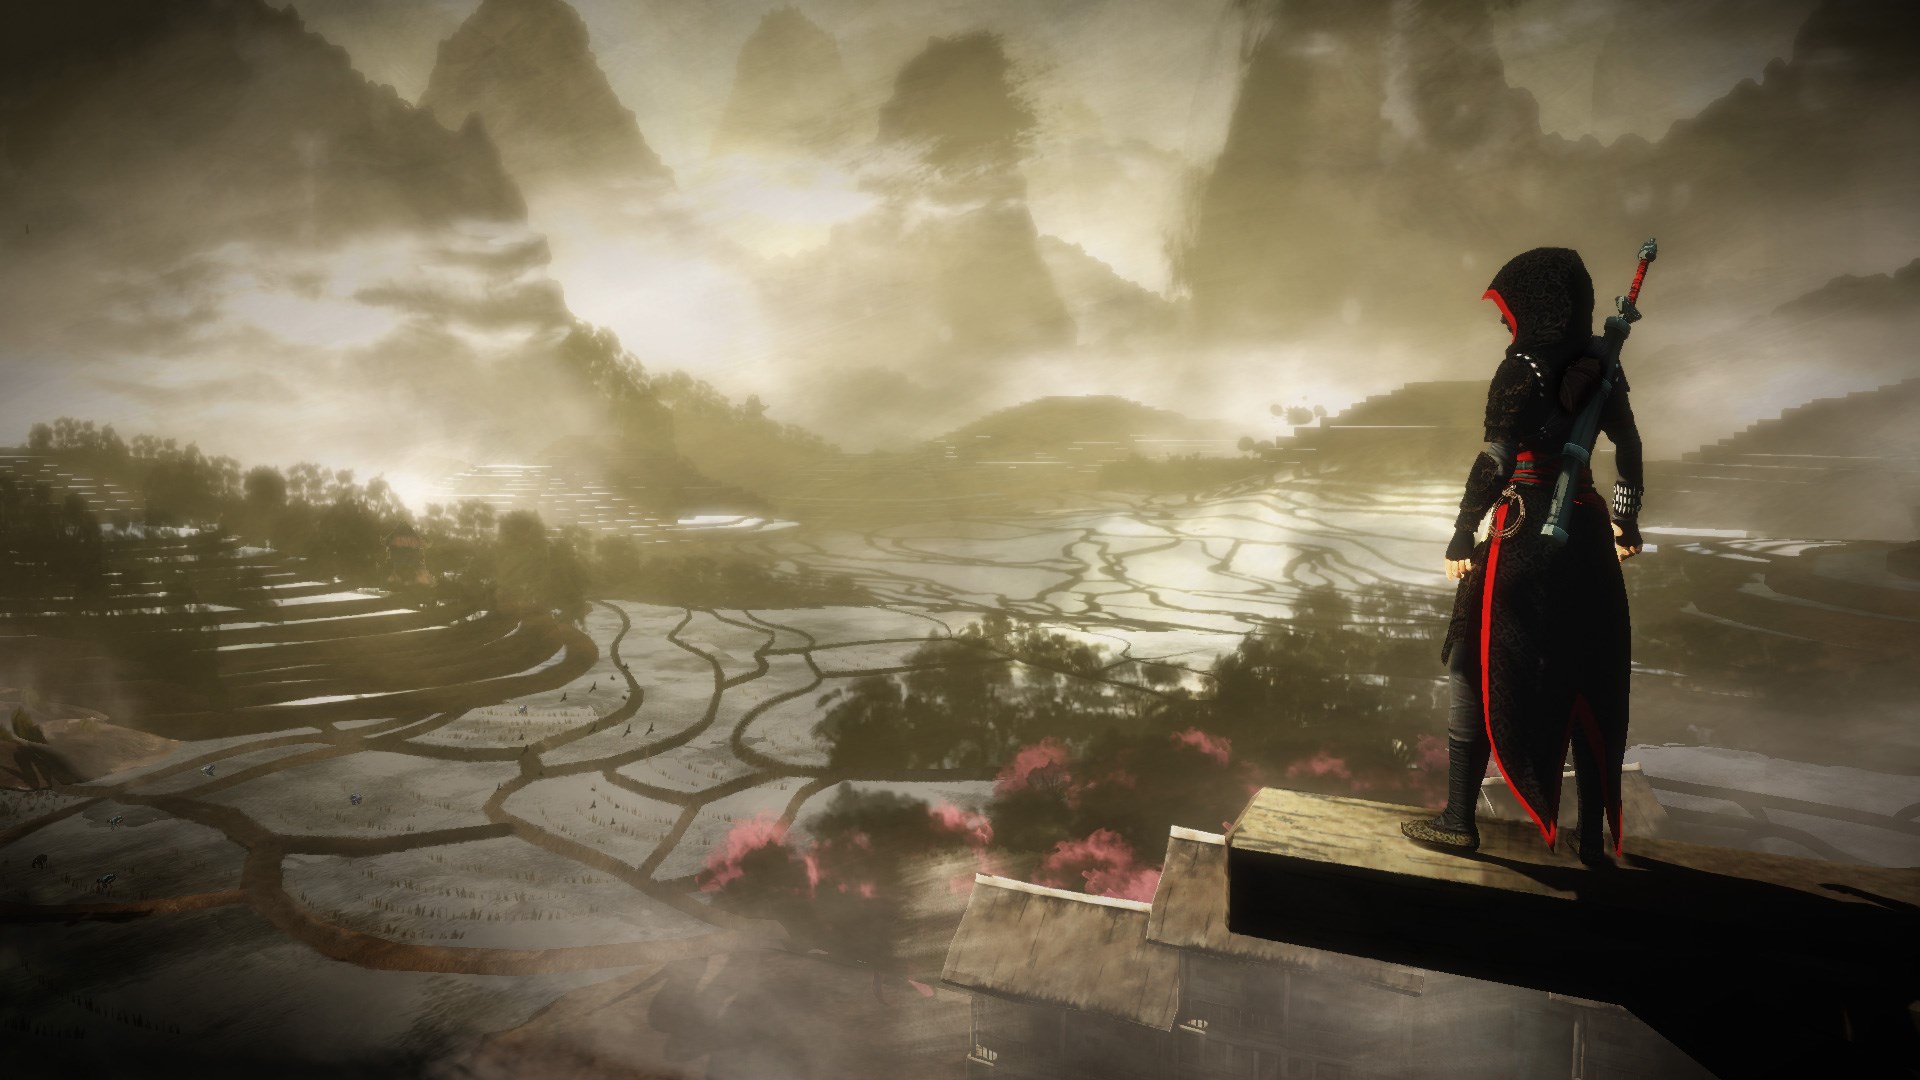 Assassin’s Creed Chronicles – Trilogy